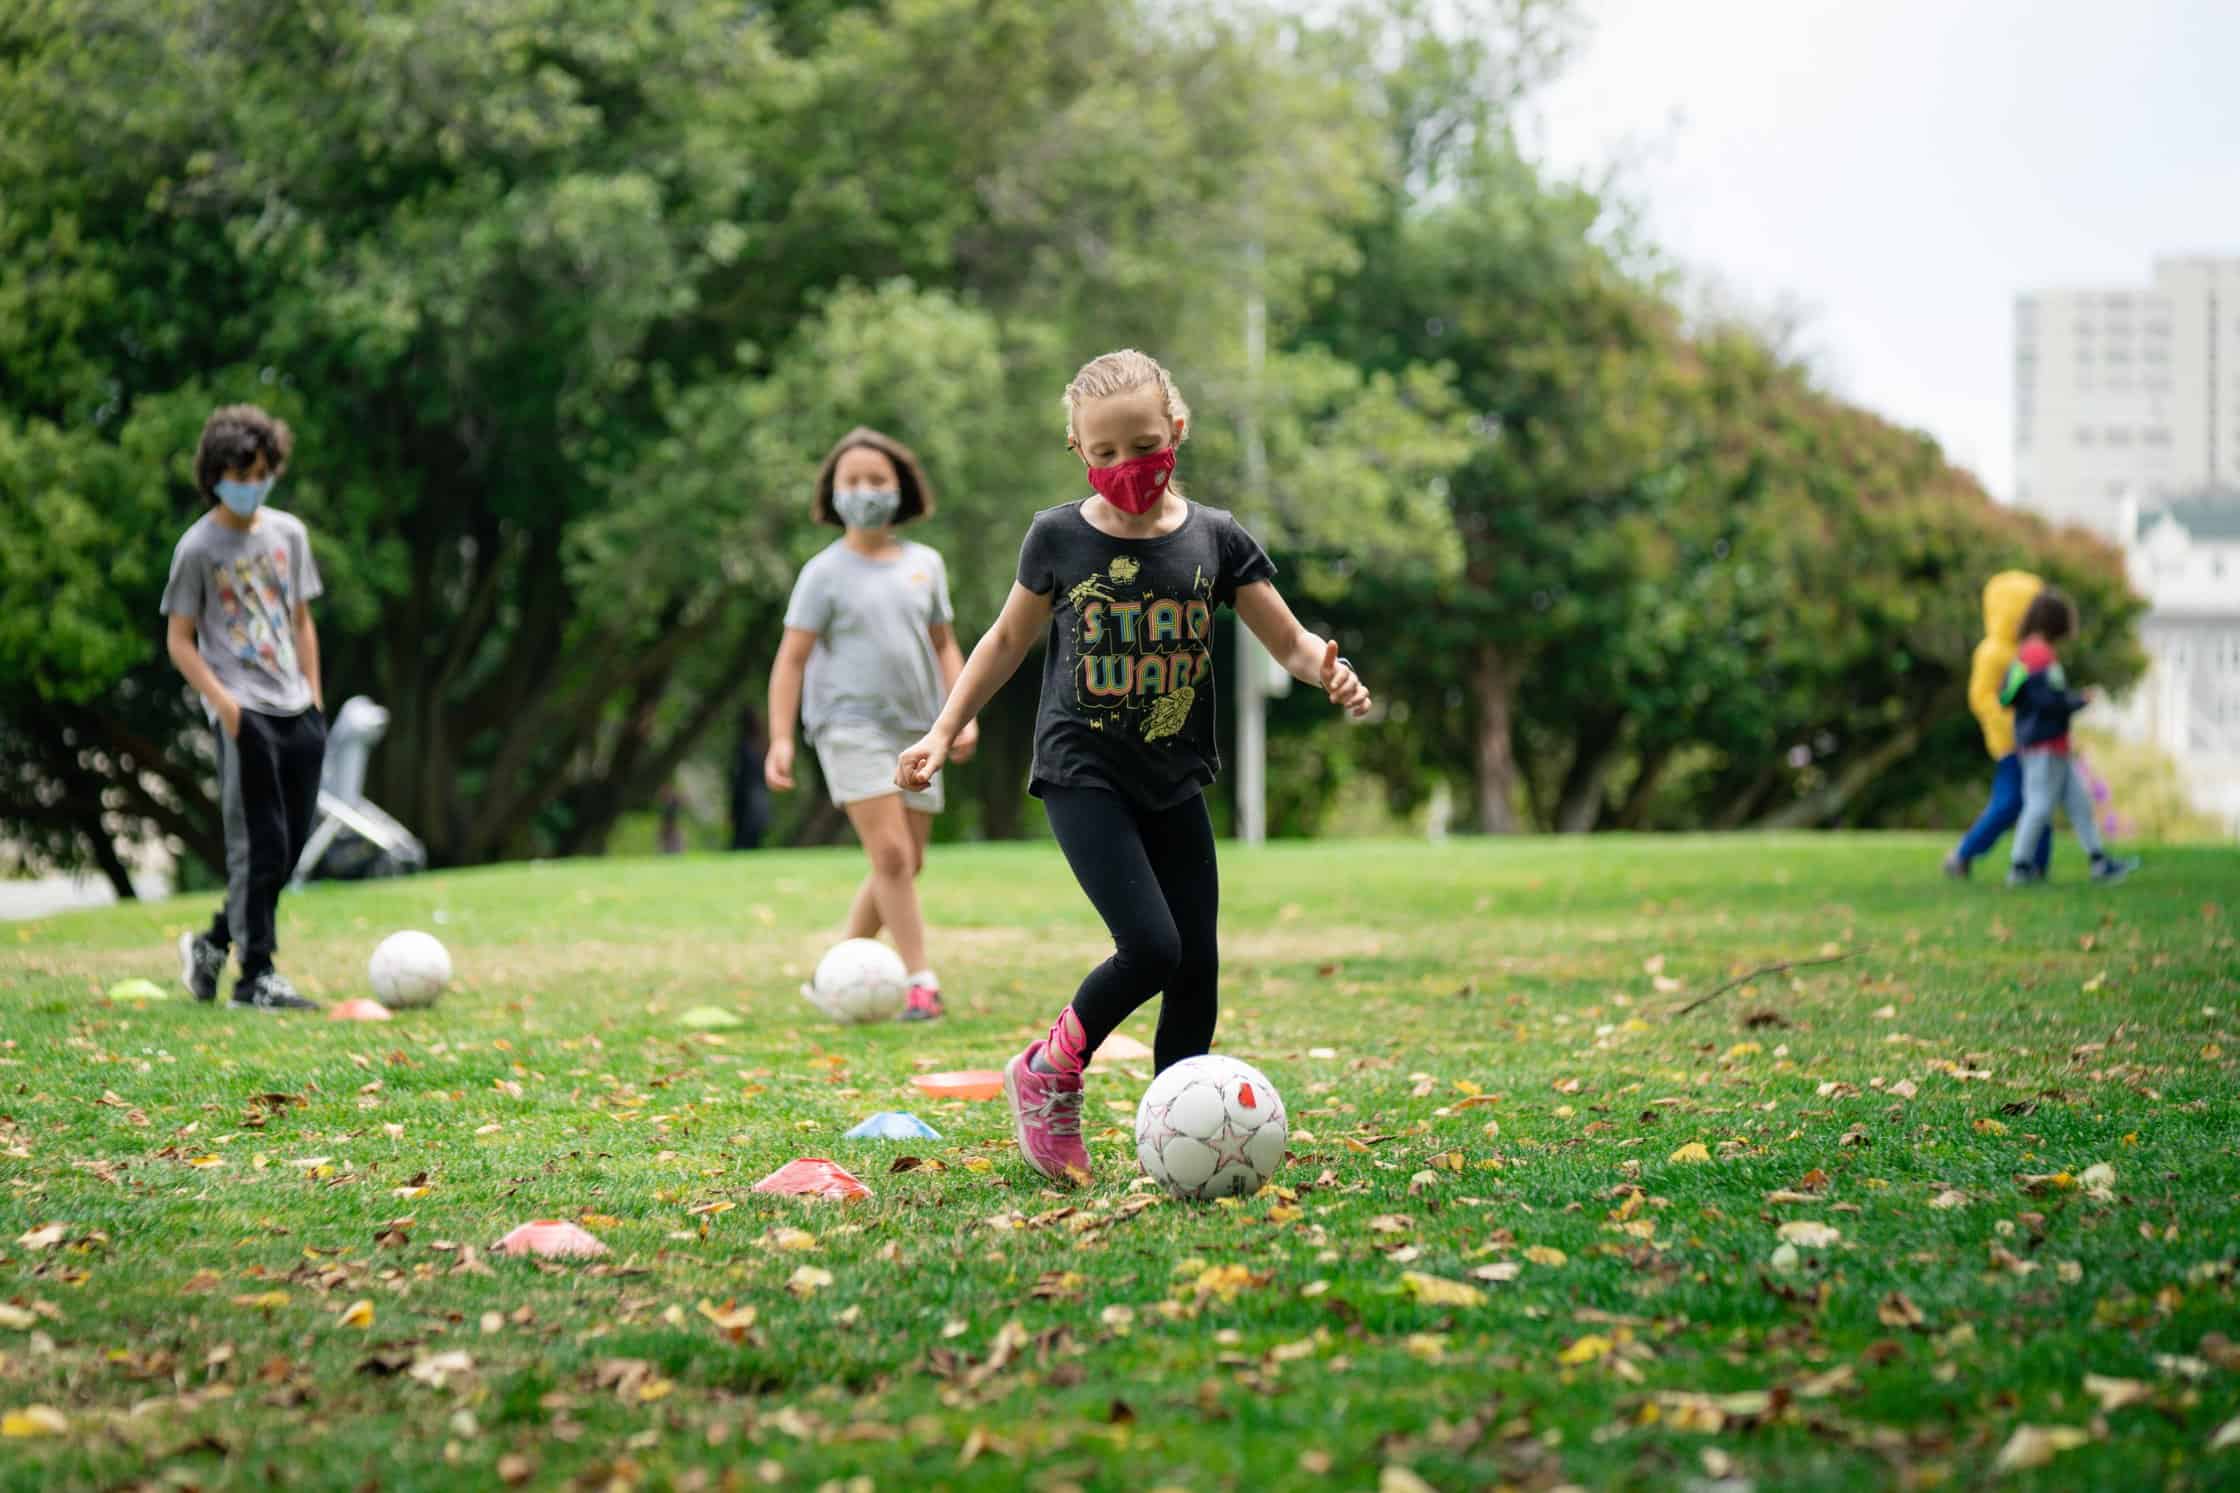 Elementary students play soccer in a field while wearing masks.